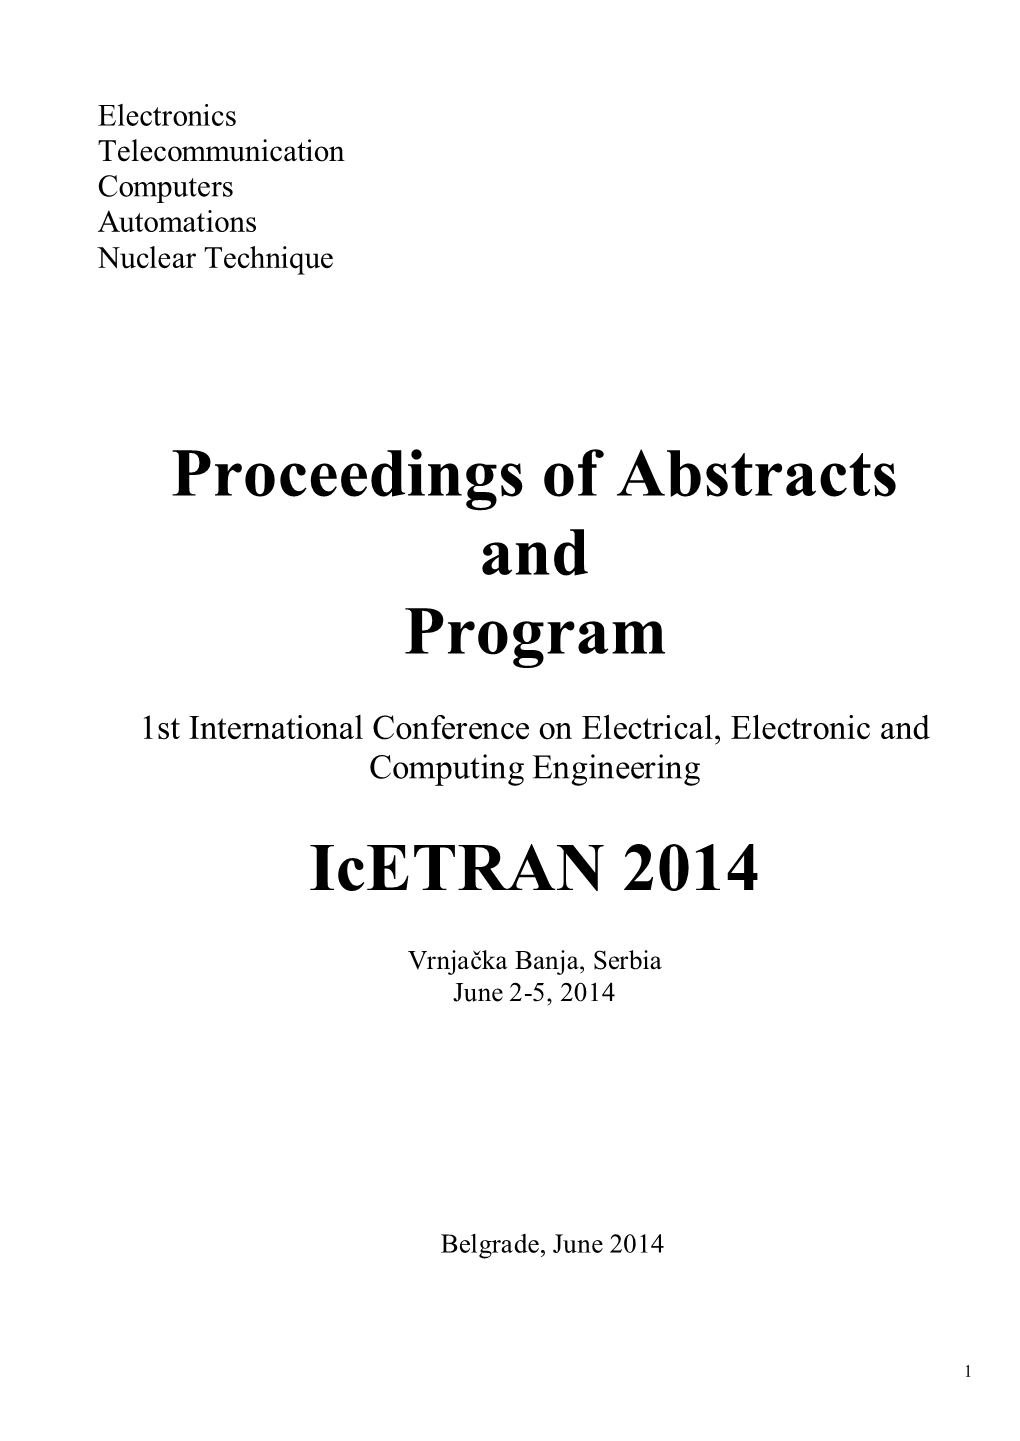 Proceedings of Abstracts and Program Icetran 2014